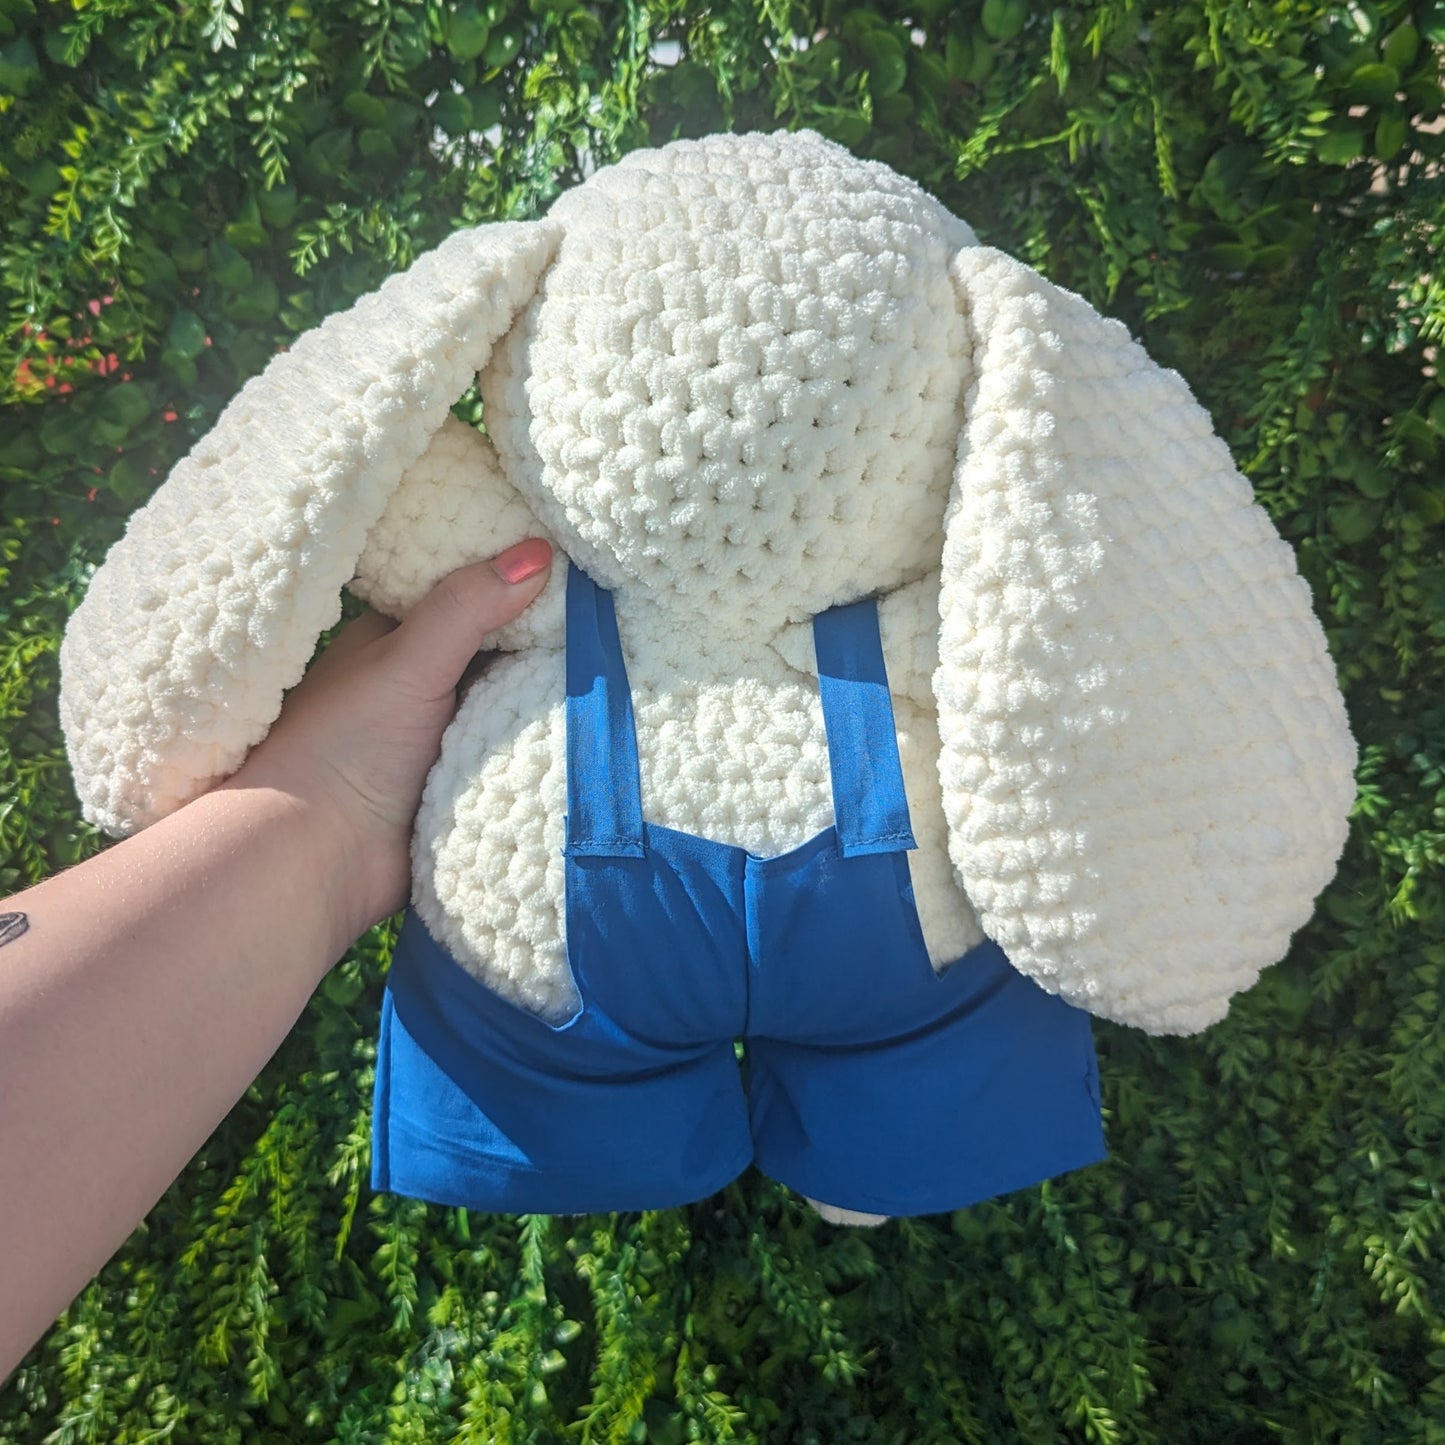 Jumbo Cream Bunny in Blue Cotton Overalls Crochet Plushie (removable overalls) [Archived]